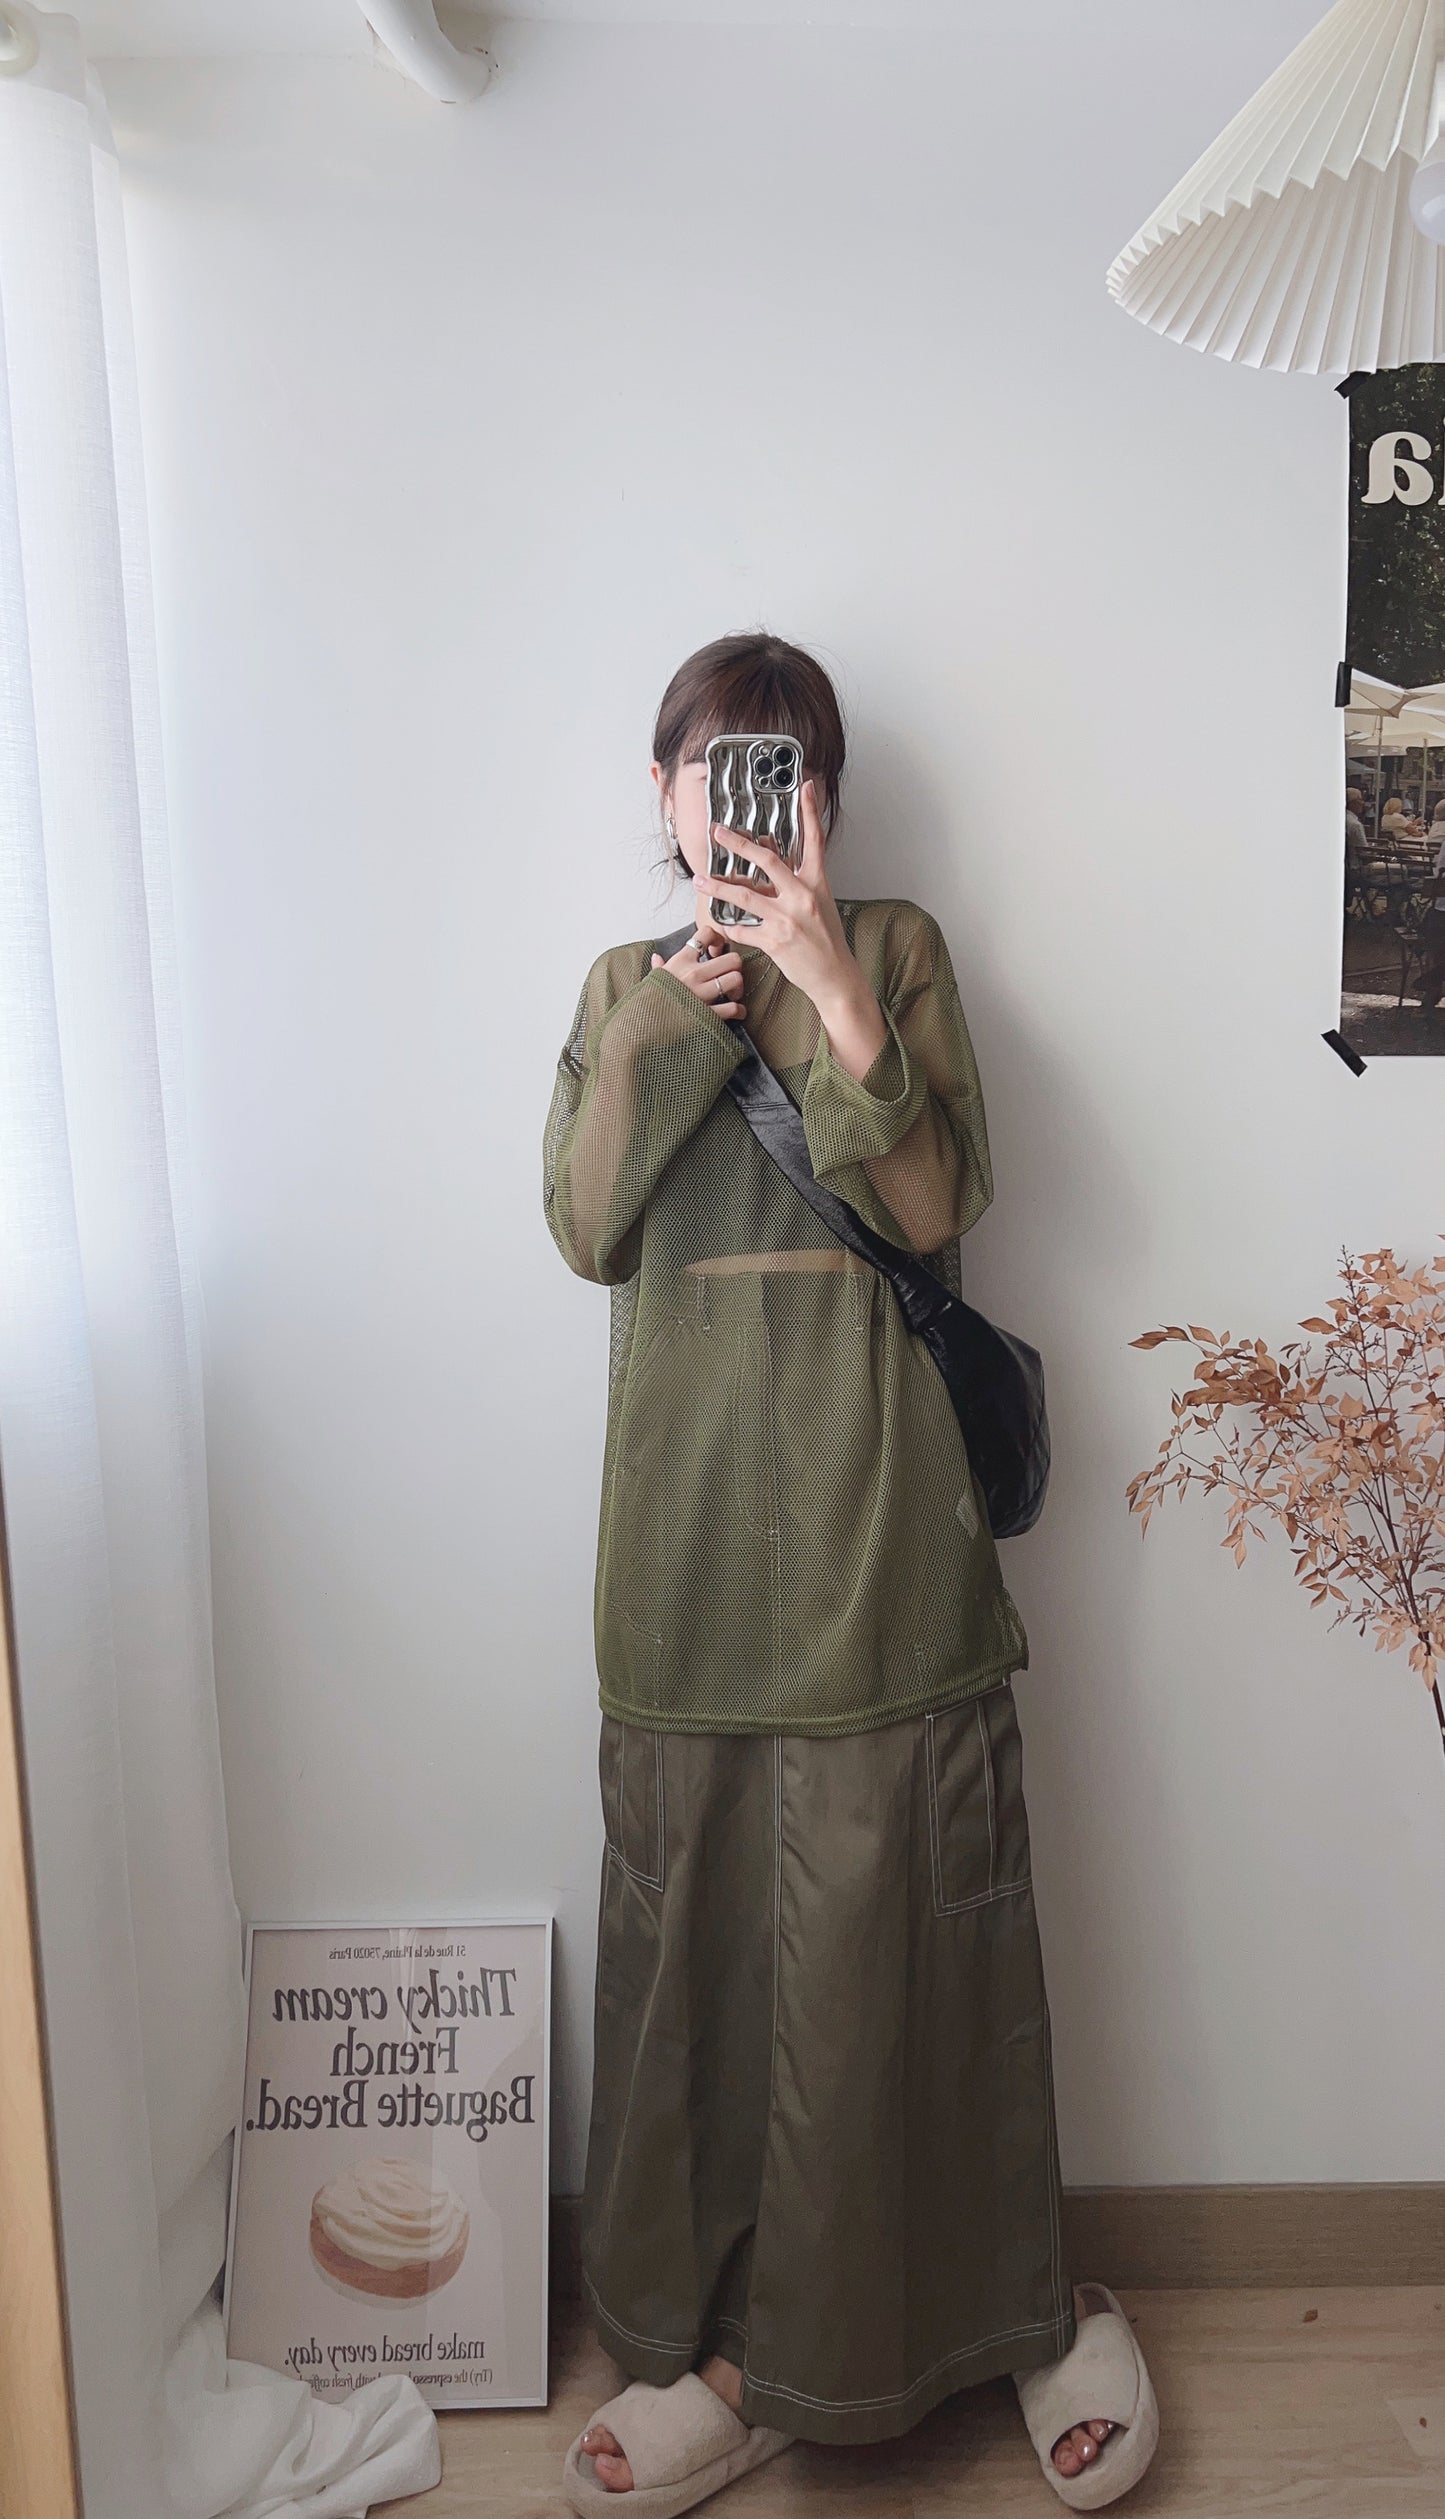 Stitching cargo skirt/ 4 colors